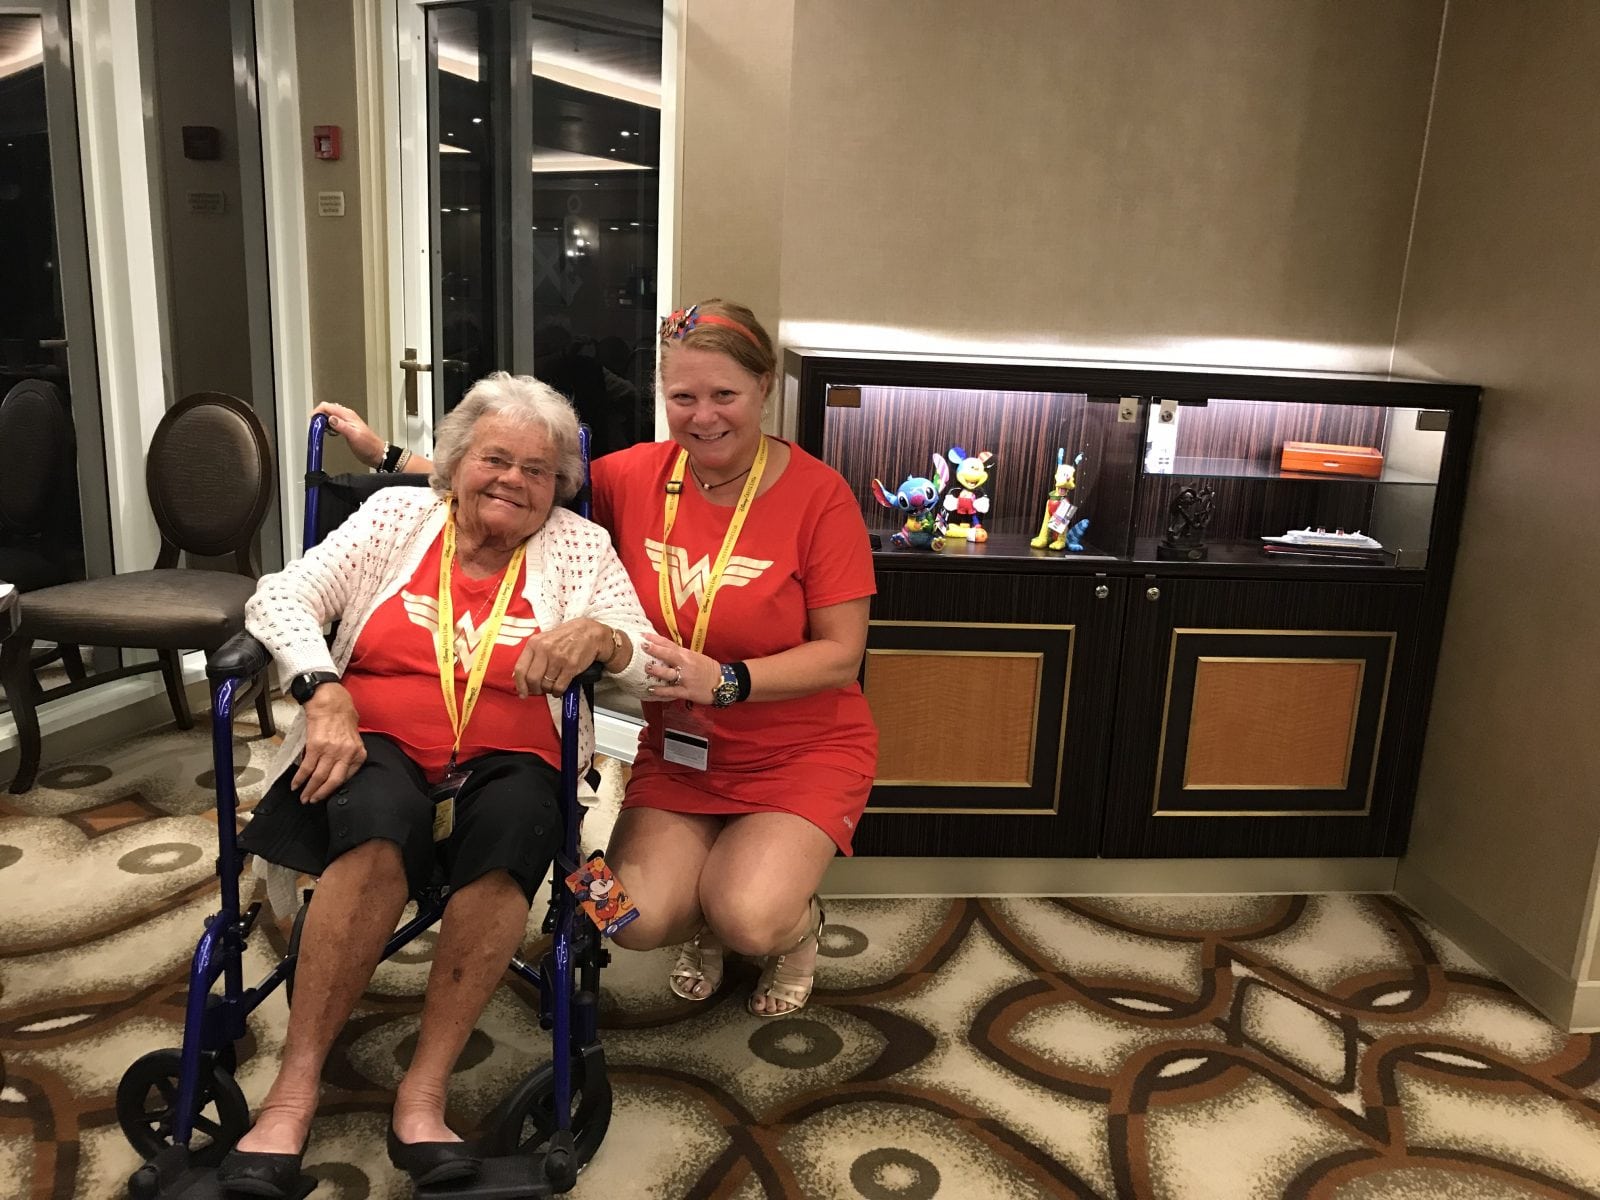 Ellen and her Mom on the cruise ship posing in wonder woman t-shirts